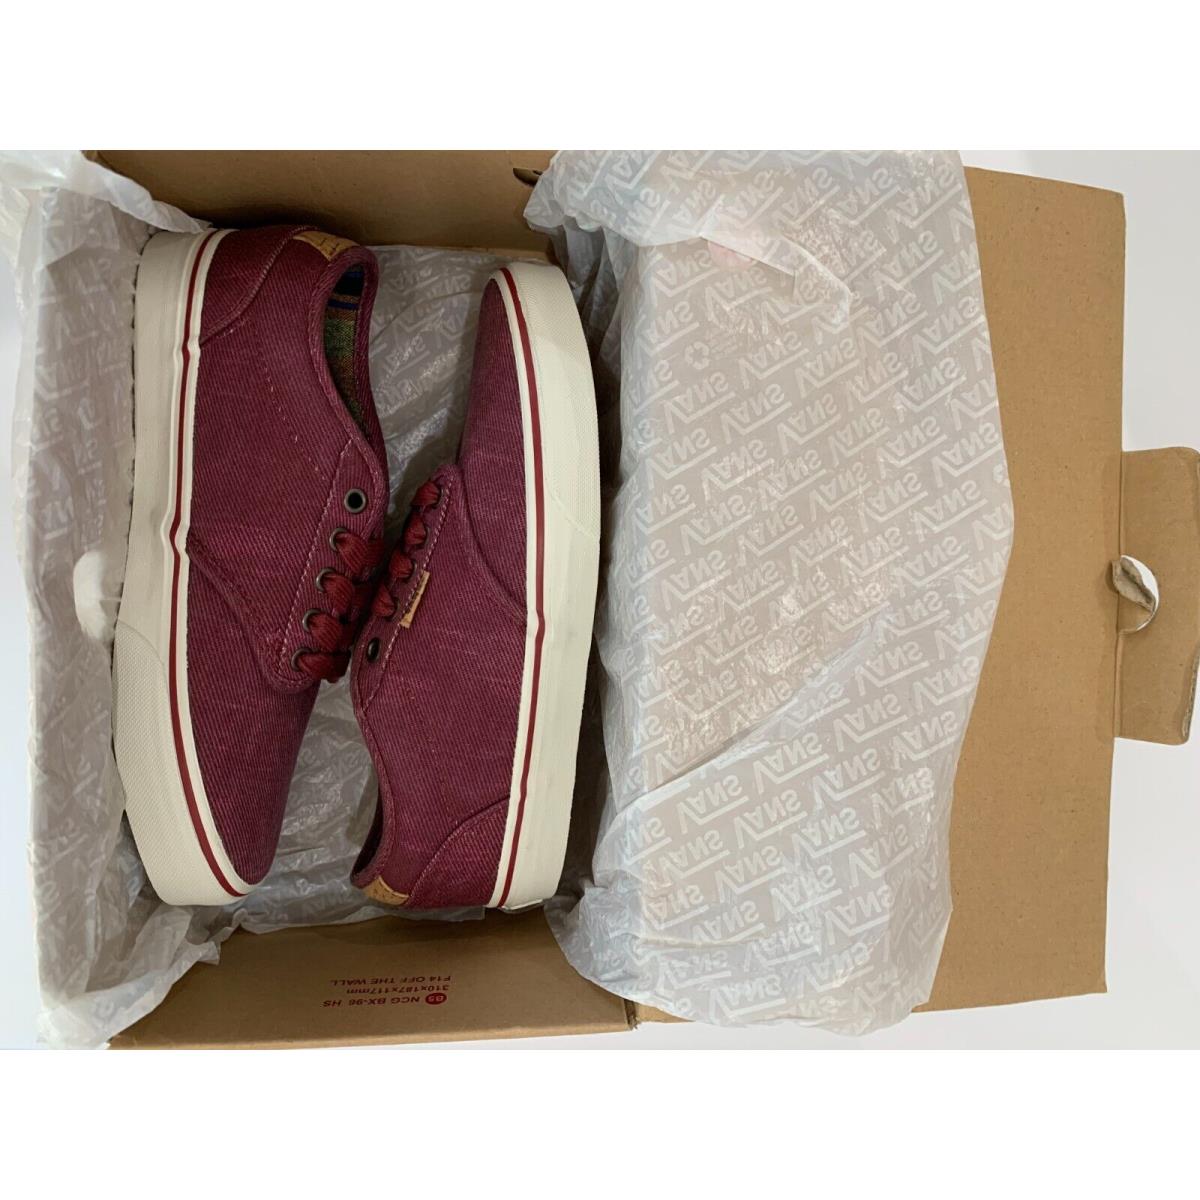 Vans Mens Atwood Deluxe Skate Size 7.5 Burgundy Red Lace Up Sneakers Cork Accent